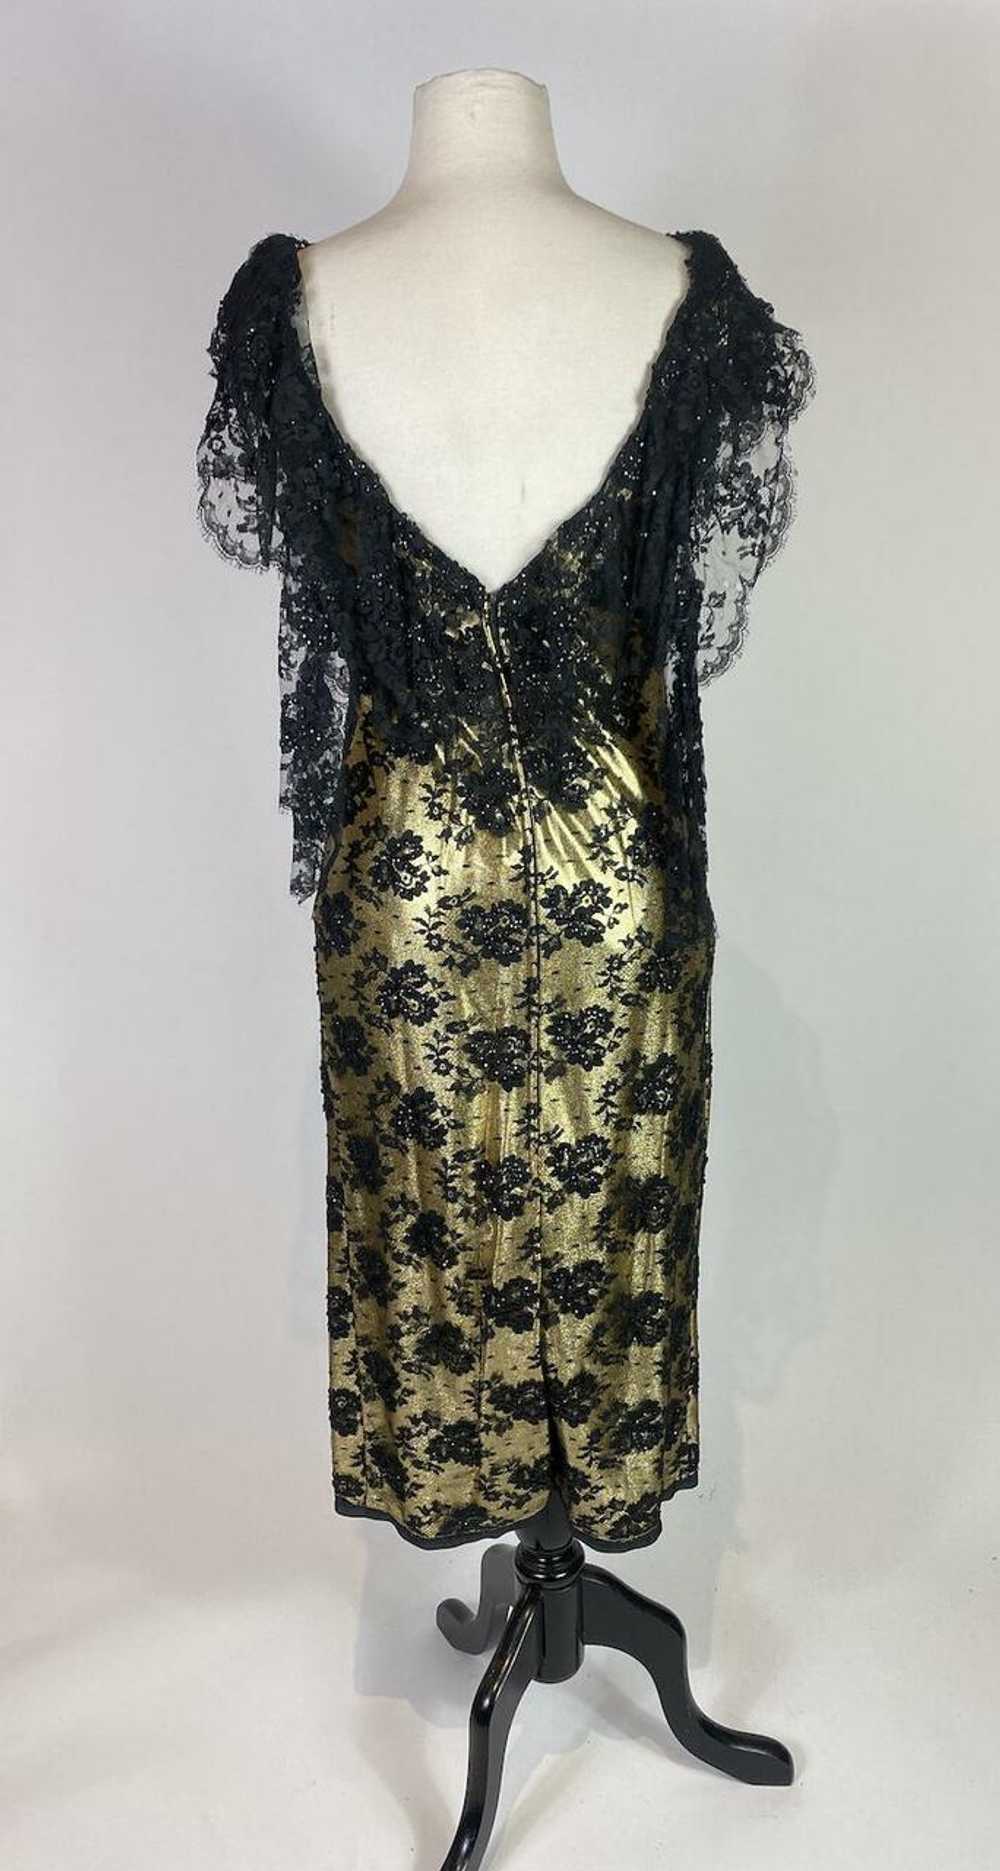 1950s - 1960s Gold Lace Overlay Sequin Dress - image 8